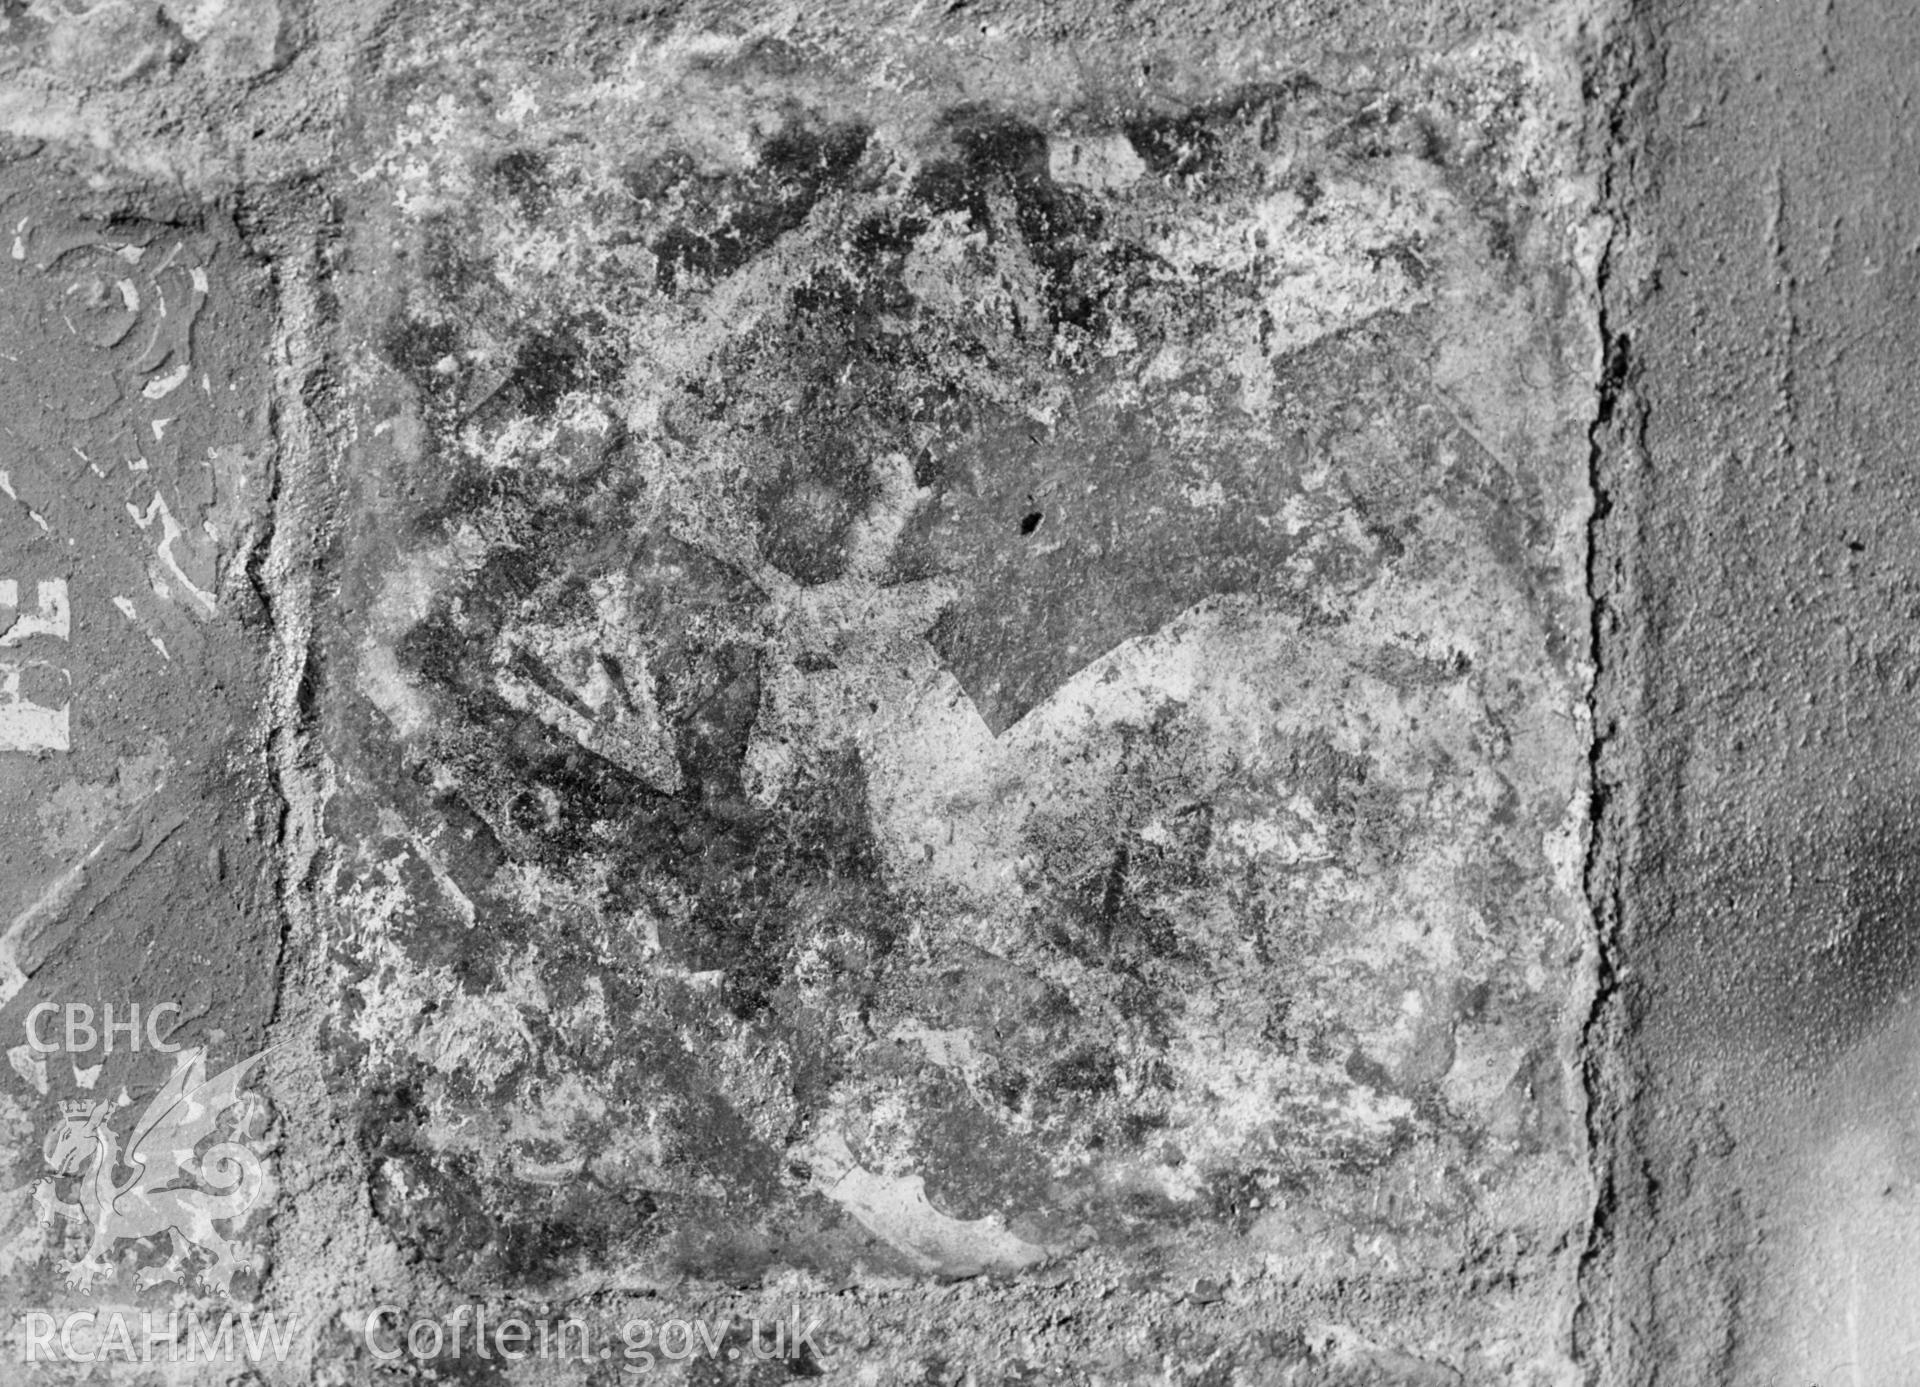 View of floor tile from Ewenny Priory, taken by Clayton pre-1950.